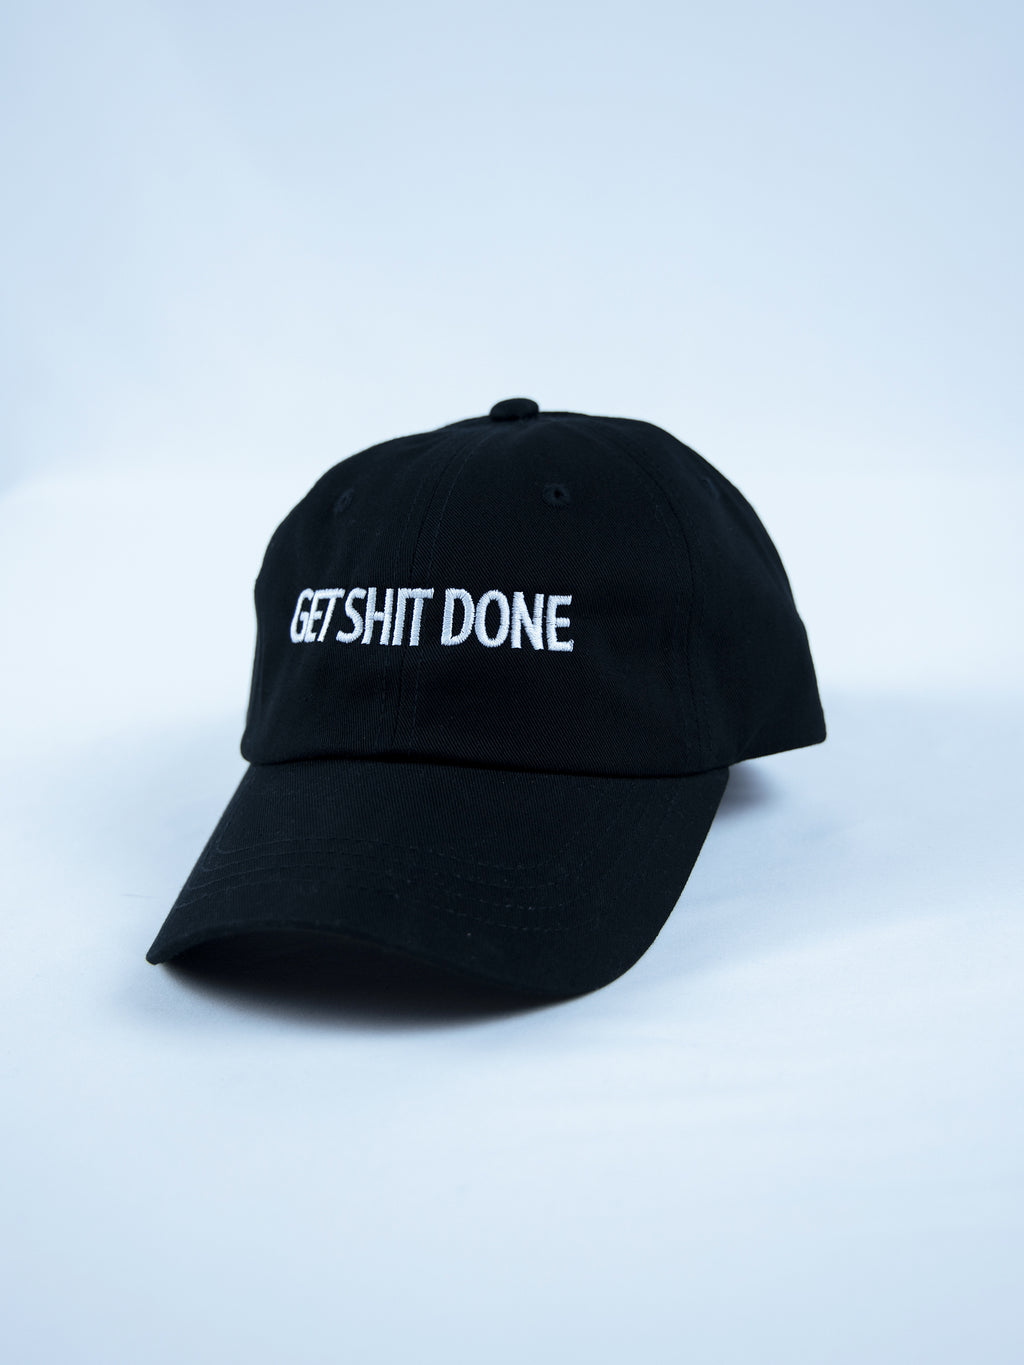 "Get Shit Done" Dad Hat, Embroideredc